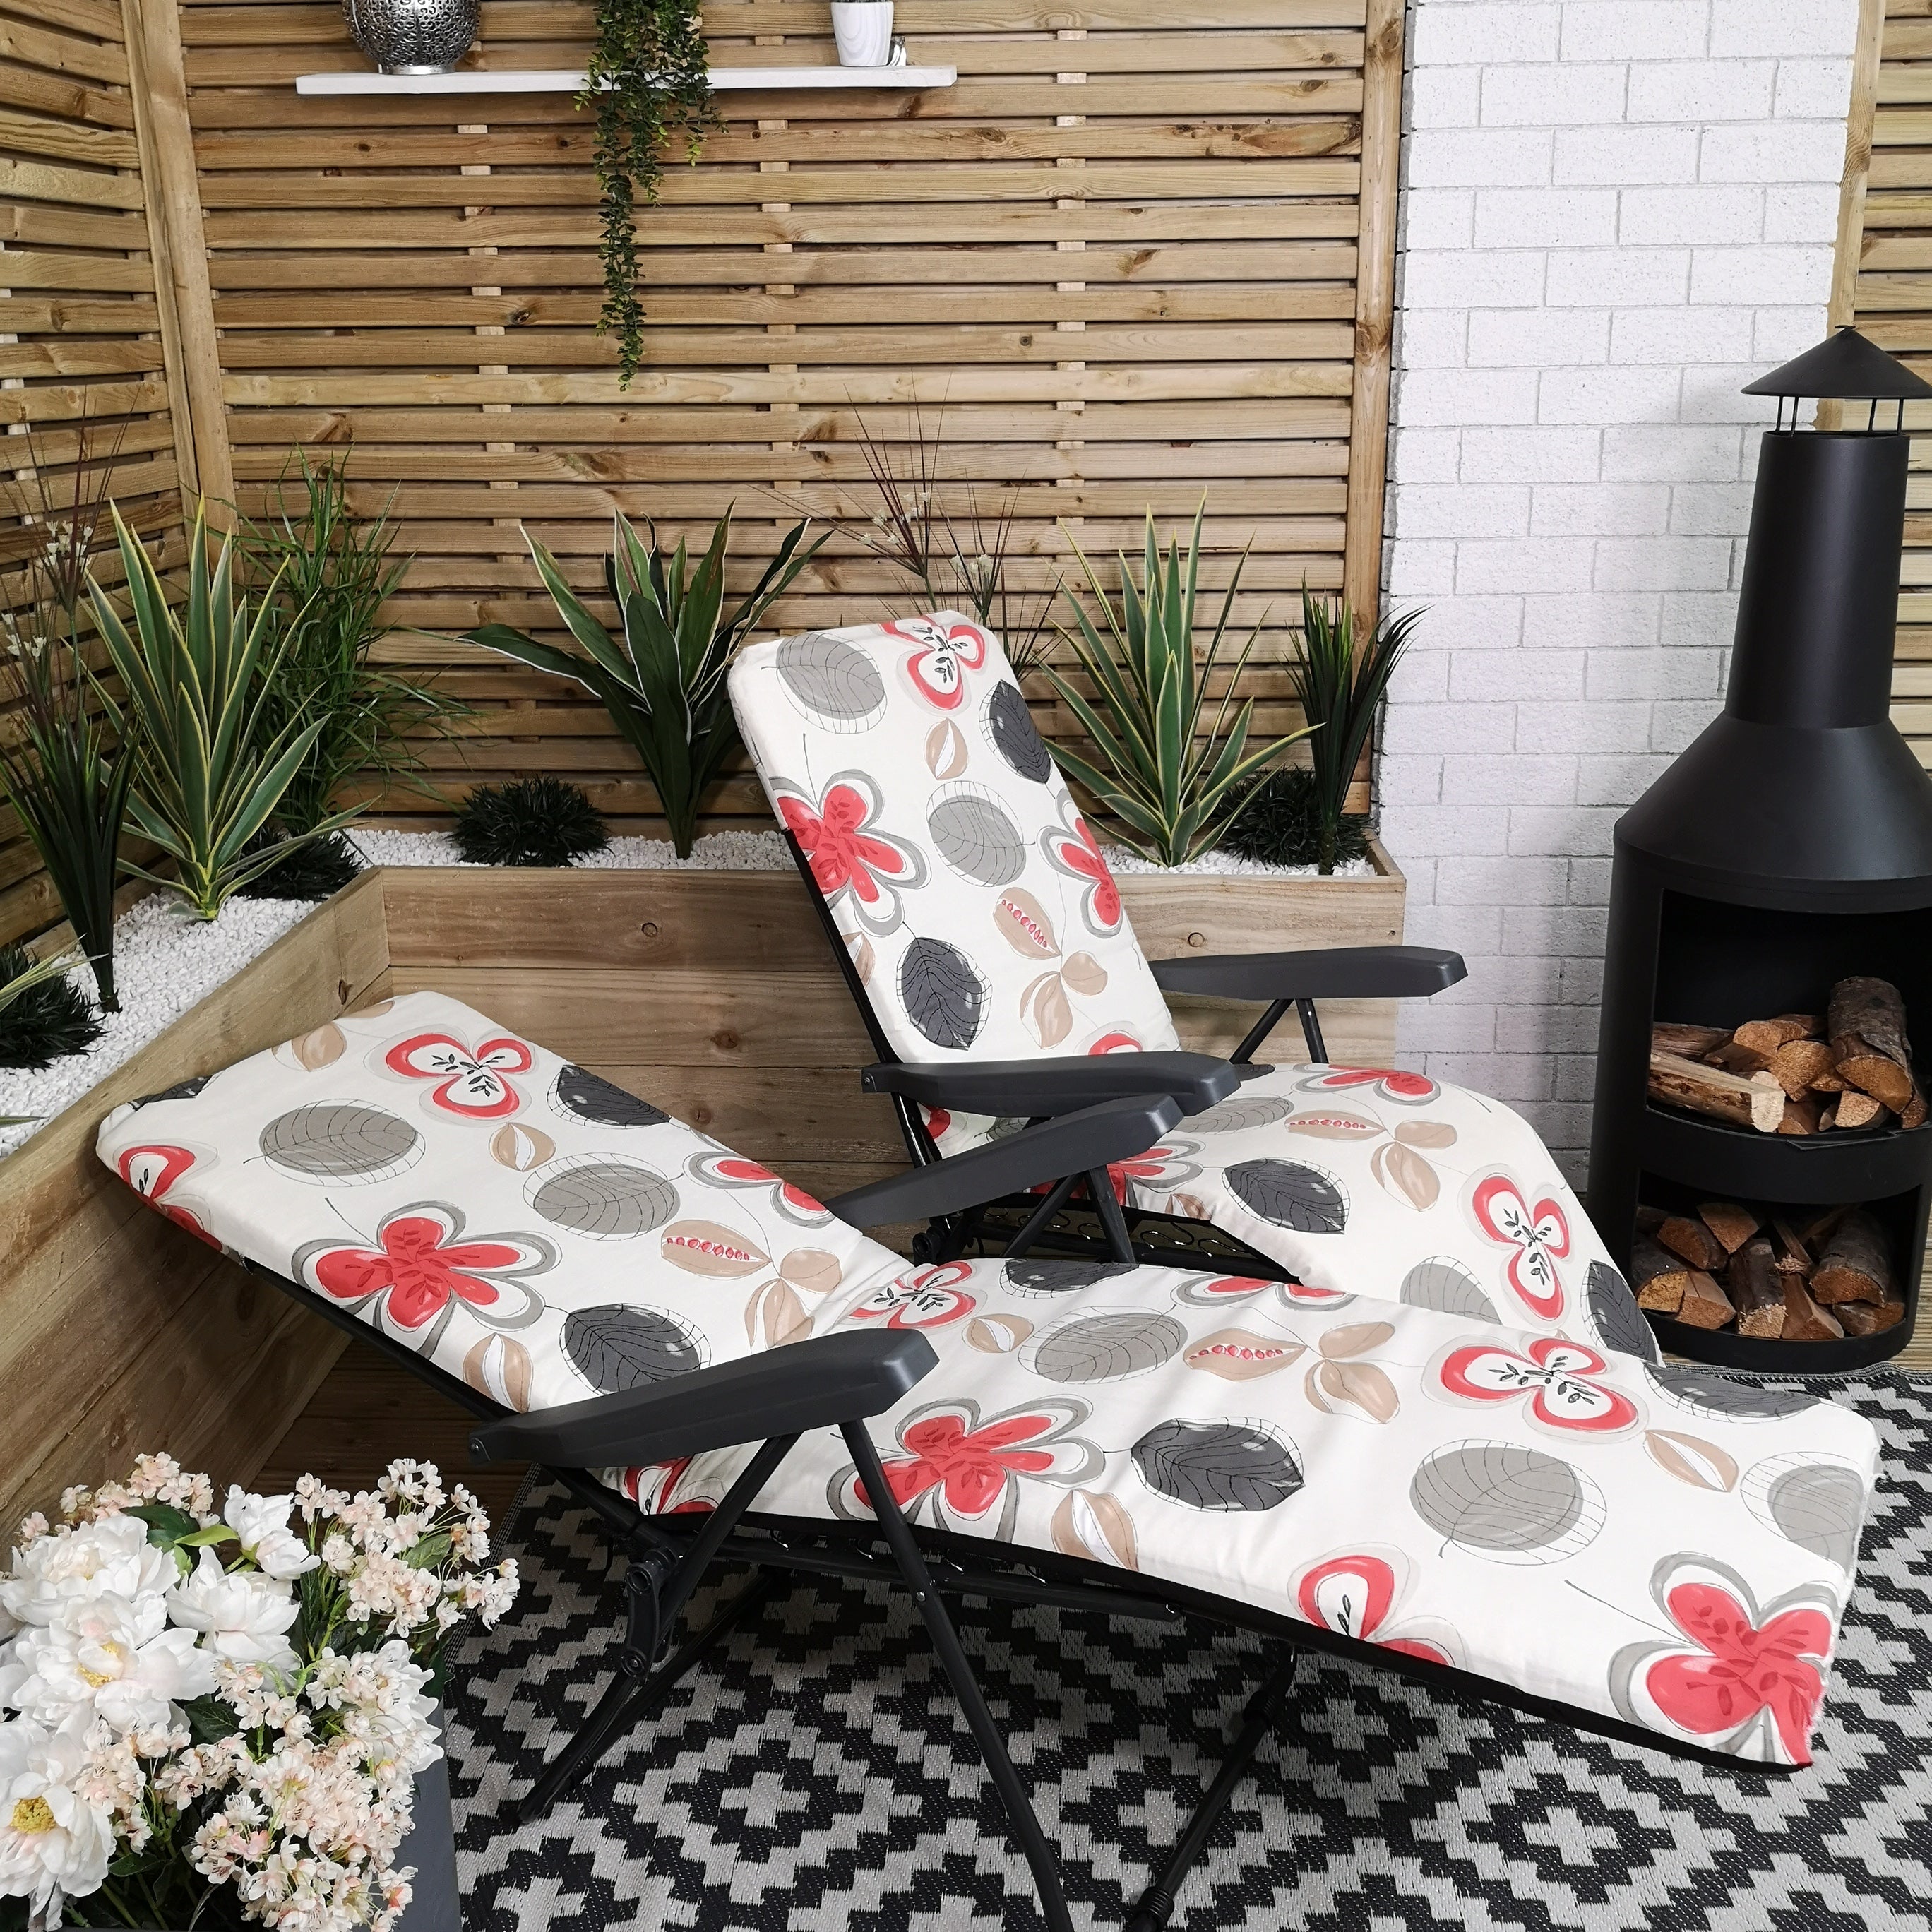 Set of 2 Padded Outdoor Garden Patio Recliner / Sun Lounger with Flowers